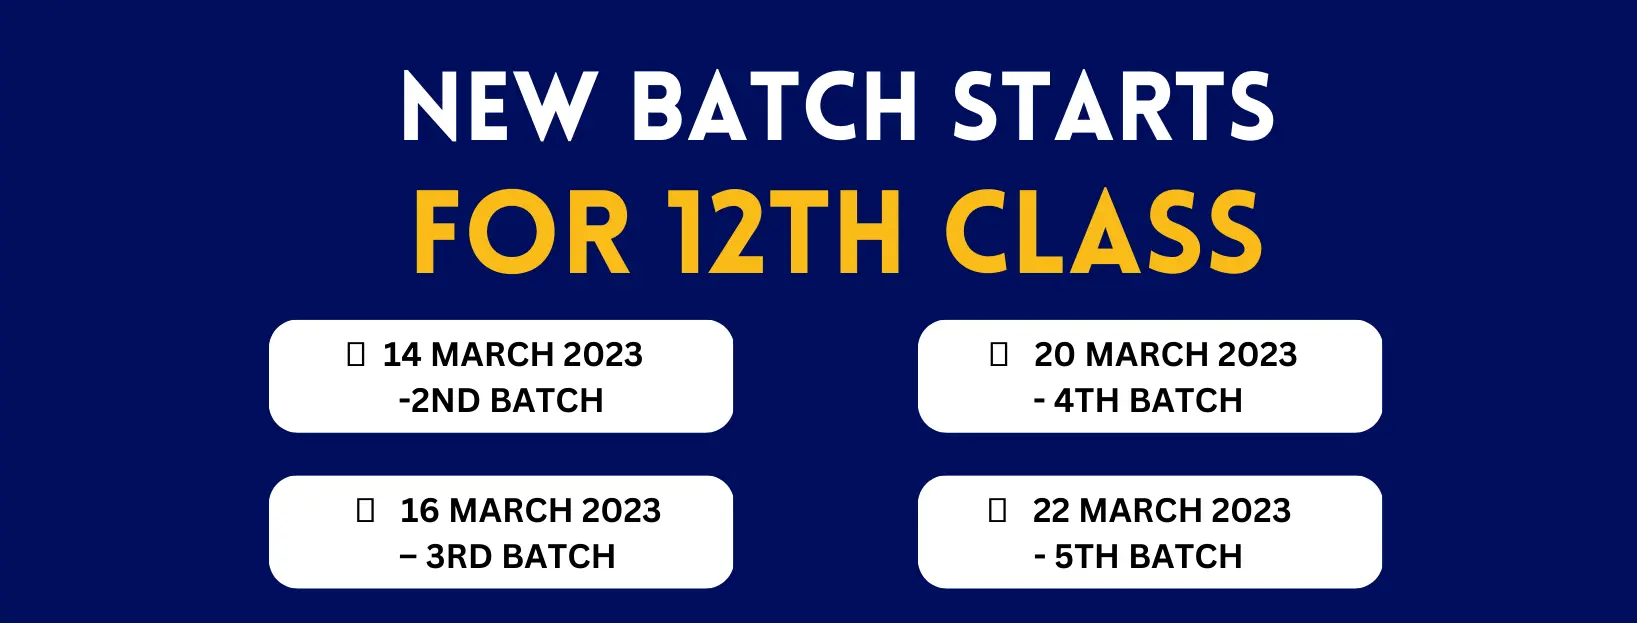 New Batch Timing for class 12 Commerce student.